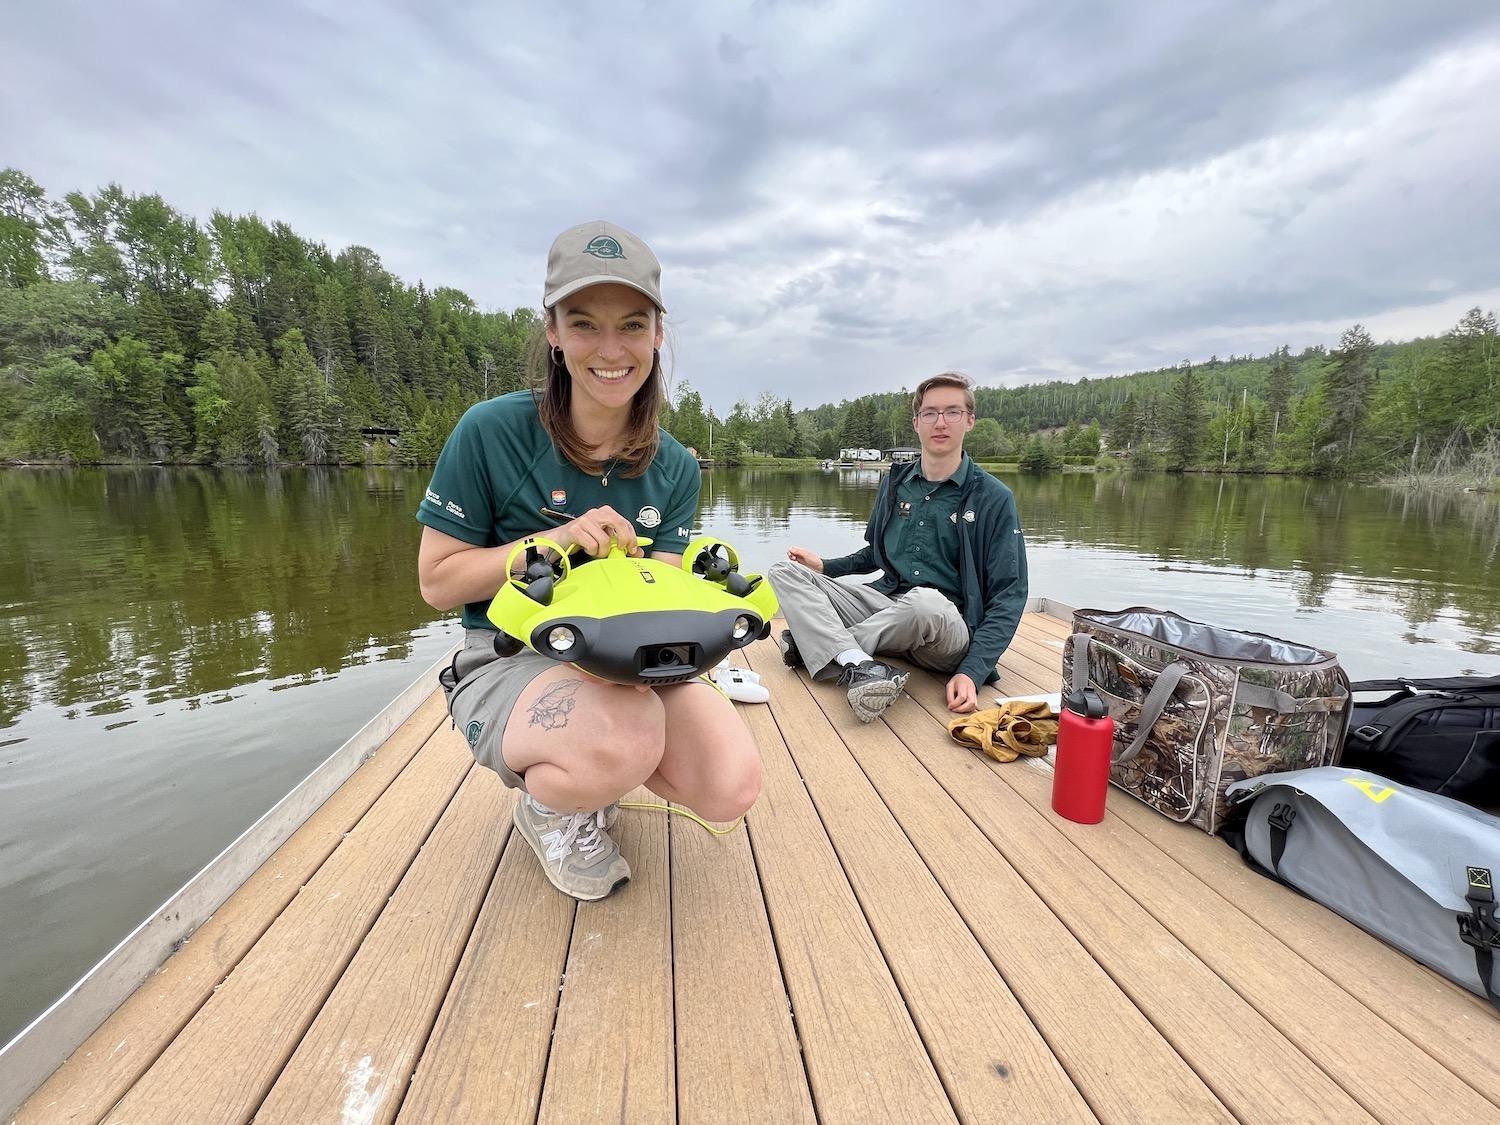 In Nipigon, Parks Canada's Abbi Buckley and Patrick Tate test-drive the Underwater Museum program with a remotely operated underwater vehicle.